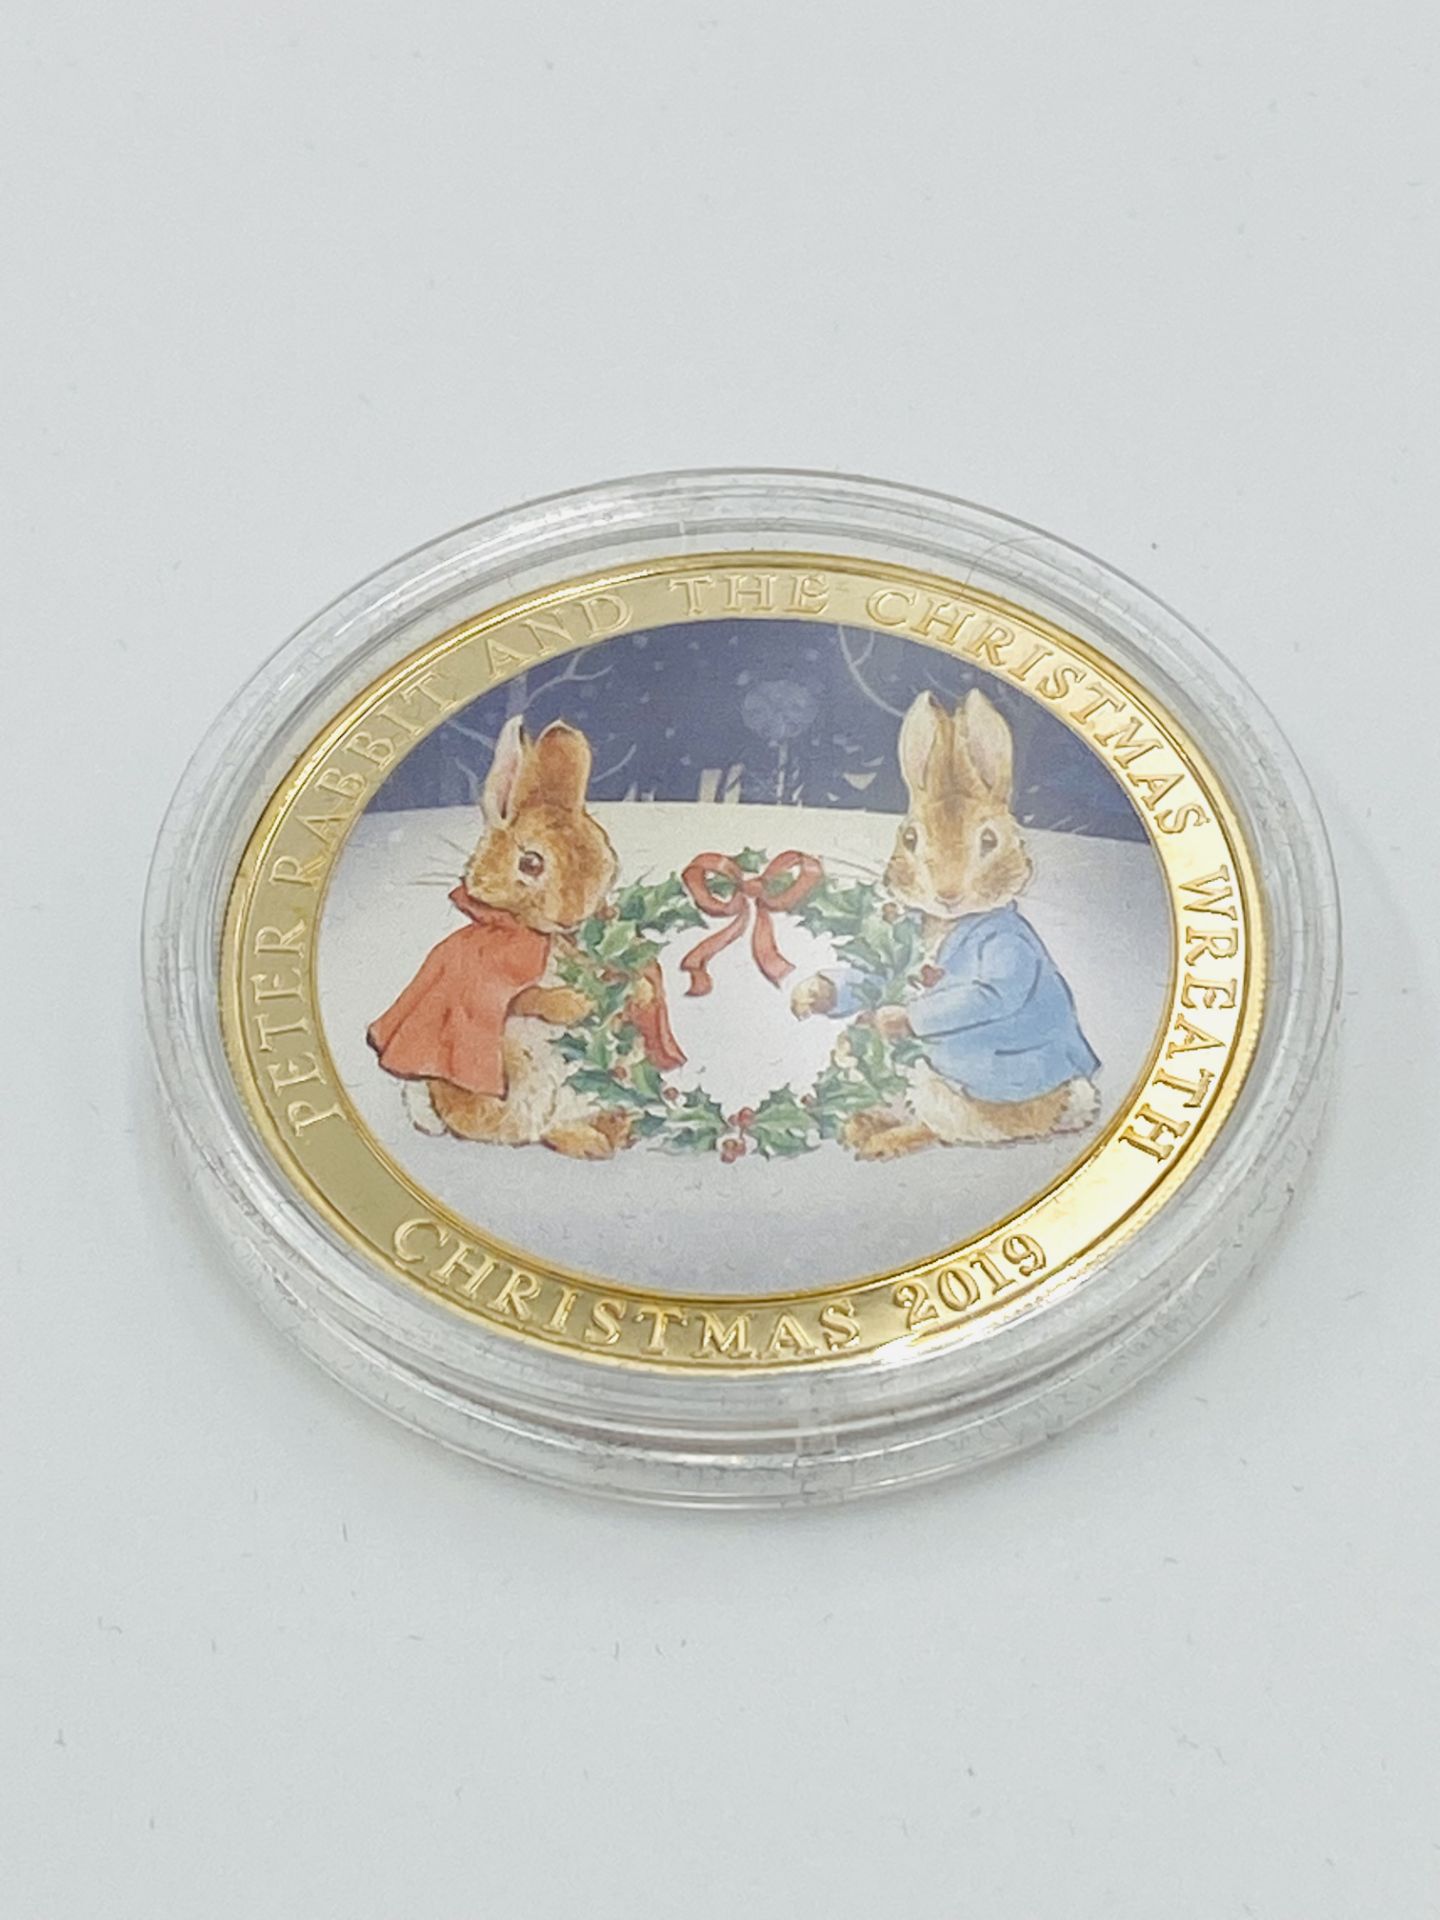 Mint Editions Limited Edition 10/30 "Peter Rabbit and the Christmas Wreath" Gold Medal - Image 2 of 4